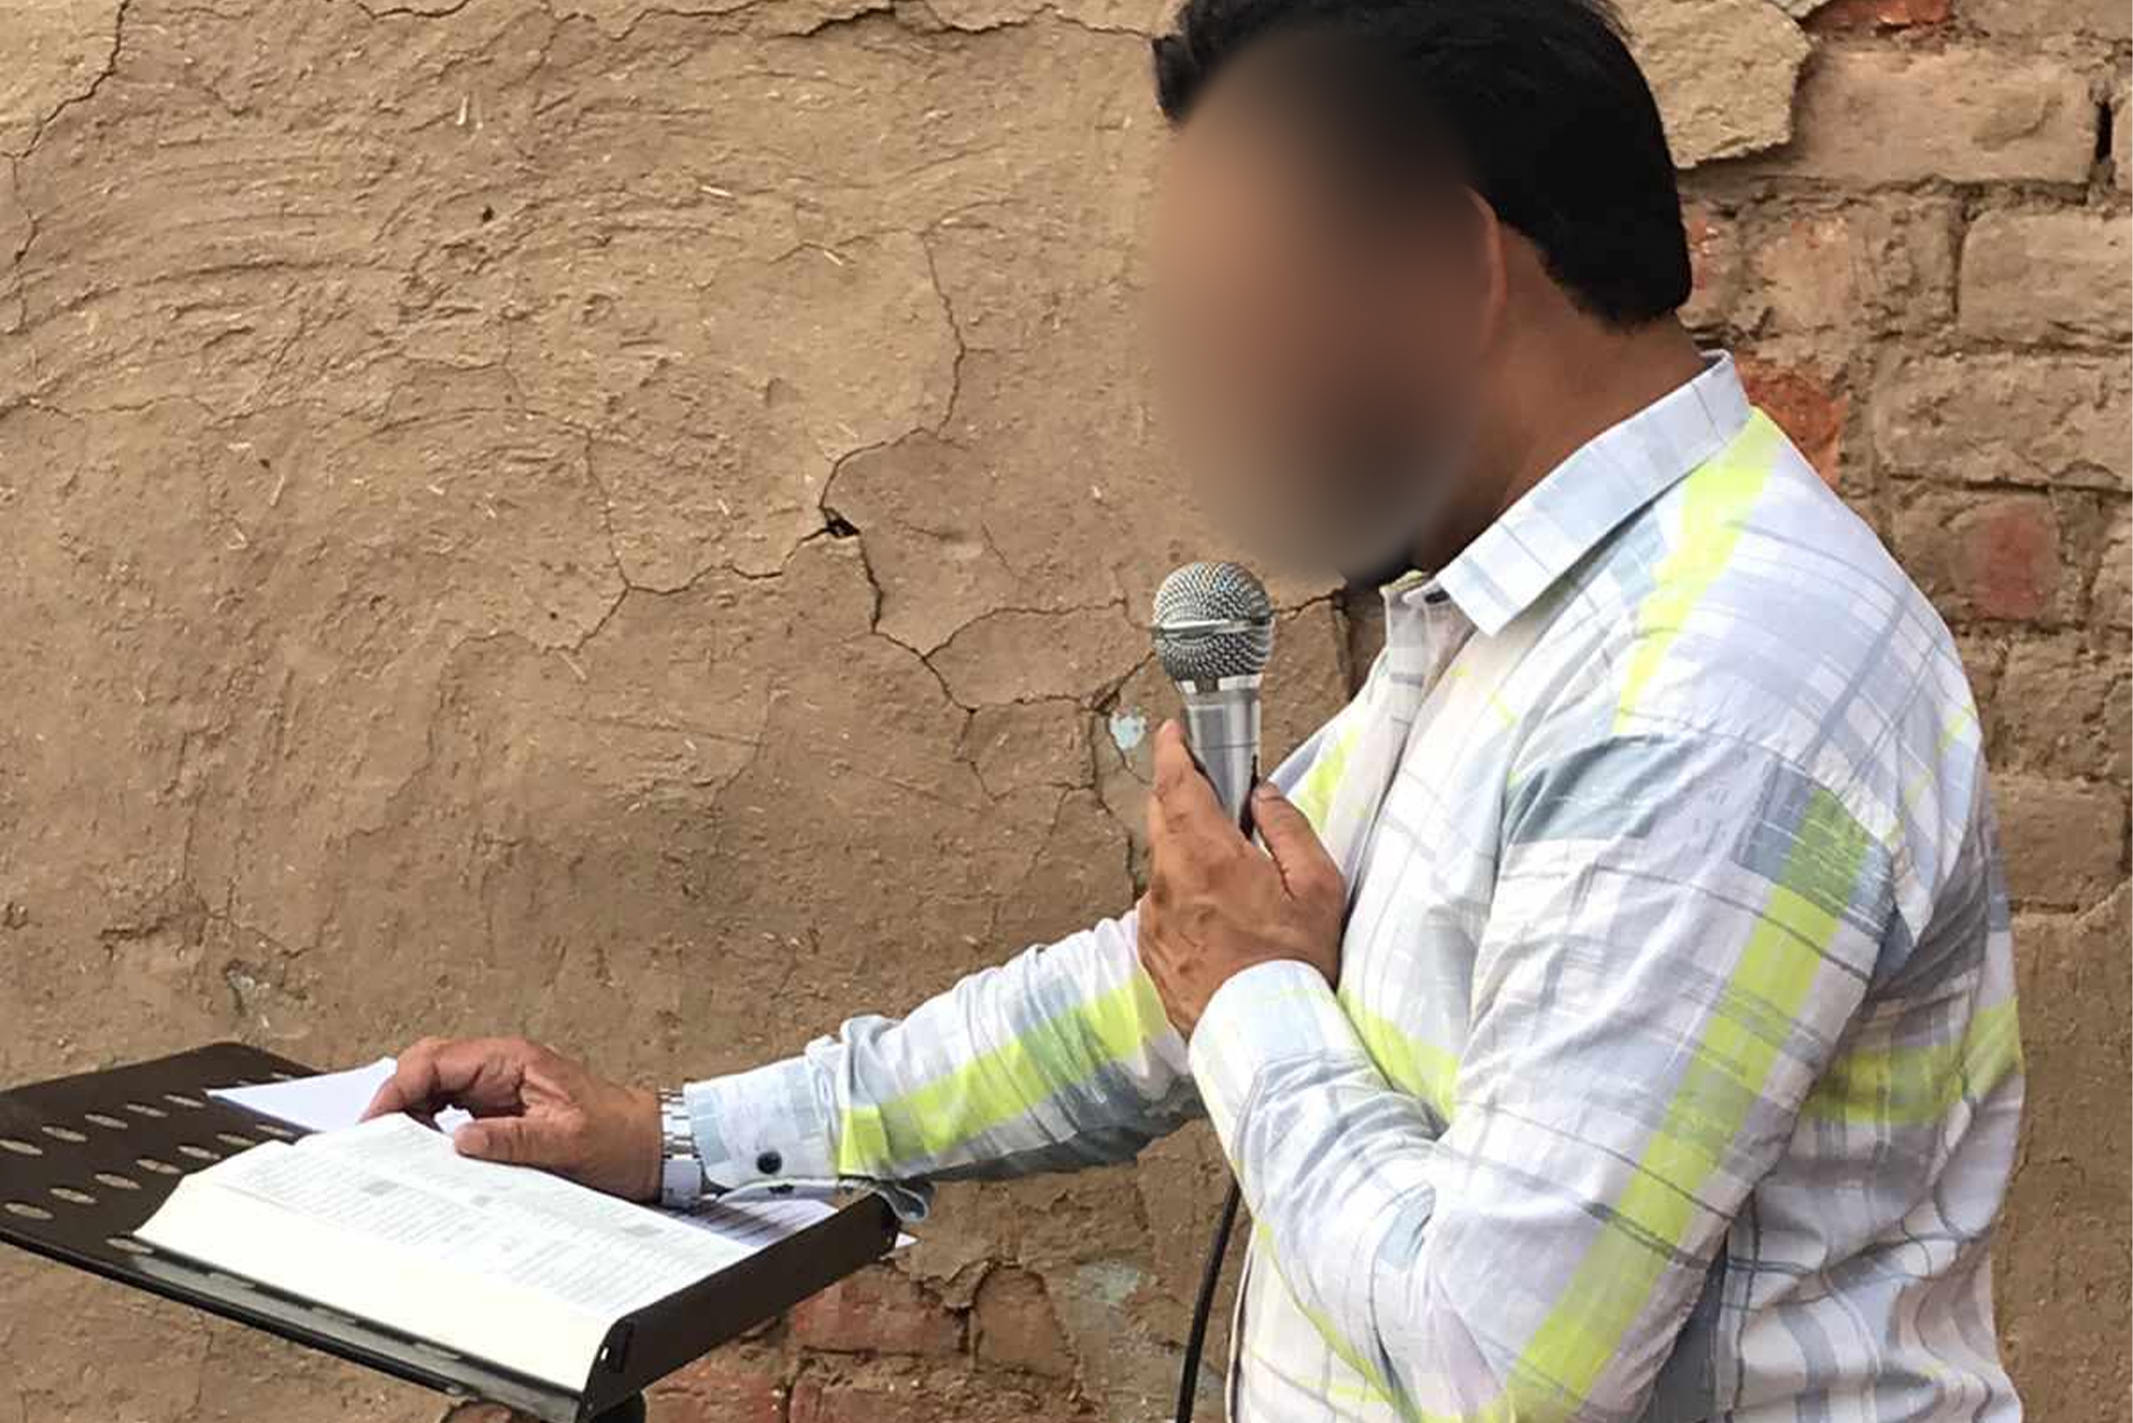 Pakistan Christian pastor preacher while holding microphone and standing next to a brick wall